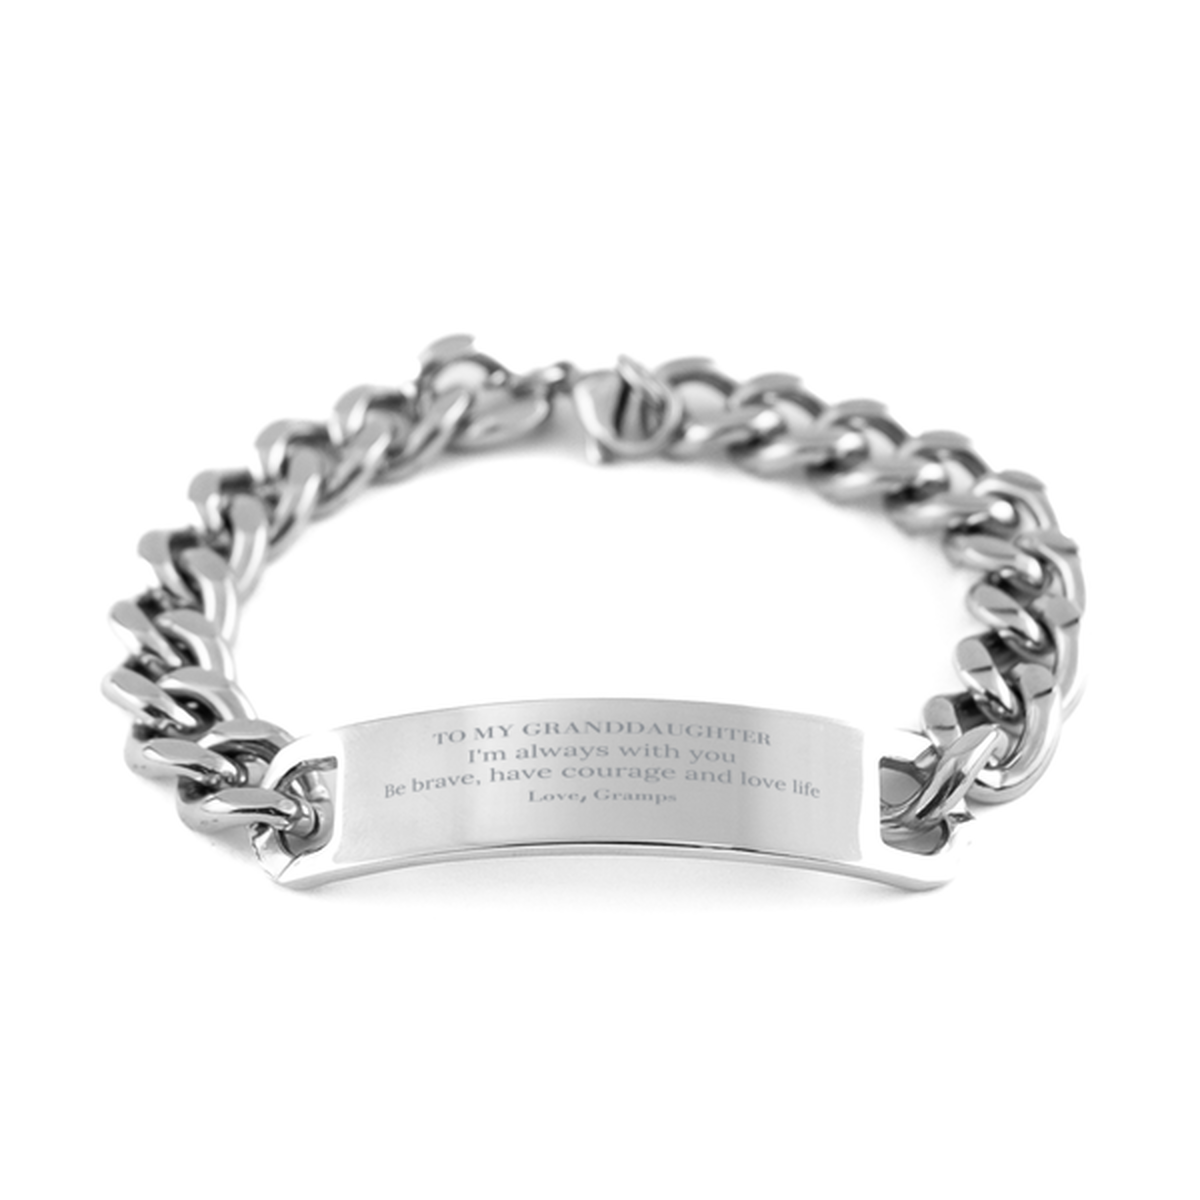 To My Granddaughter Gifts from Gramps, Unique Cuban Chain Stainless Steel Bracelet Inspirational Christmas Birthday Graduation Gifts for Granddaughter I'm always with you. Be brave, have courage and love life. Love, Gramps